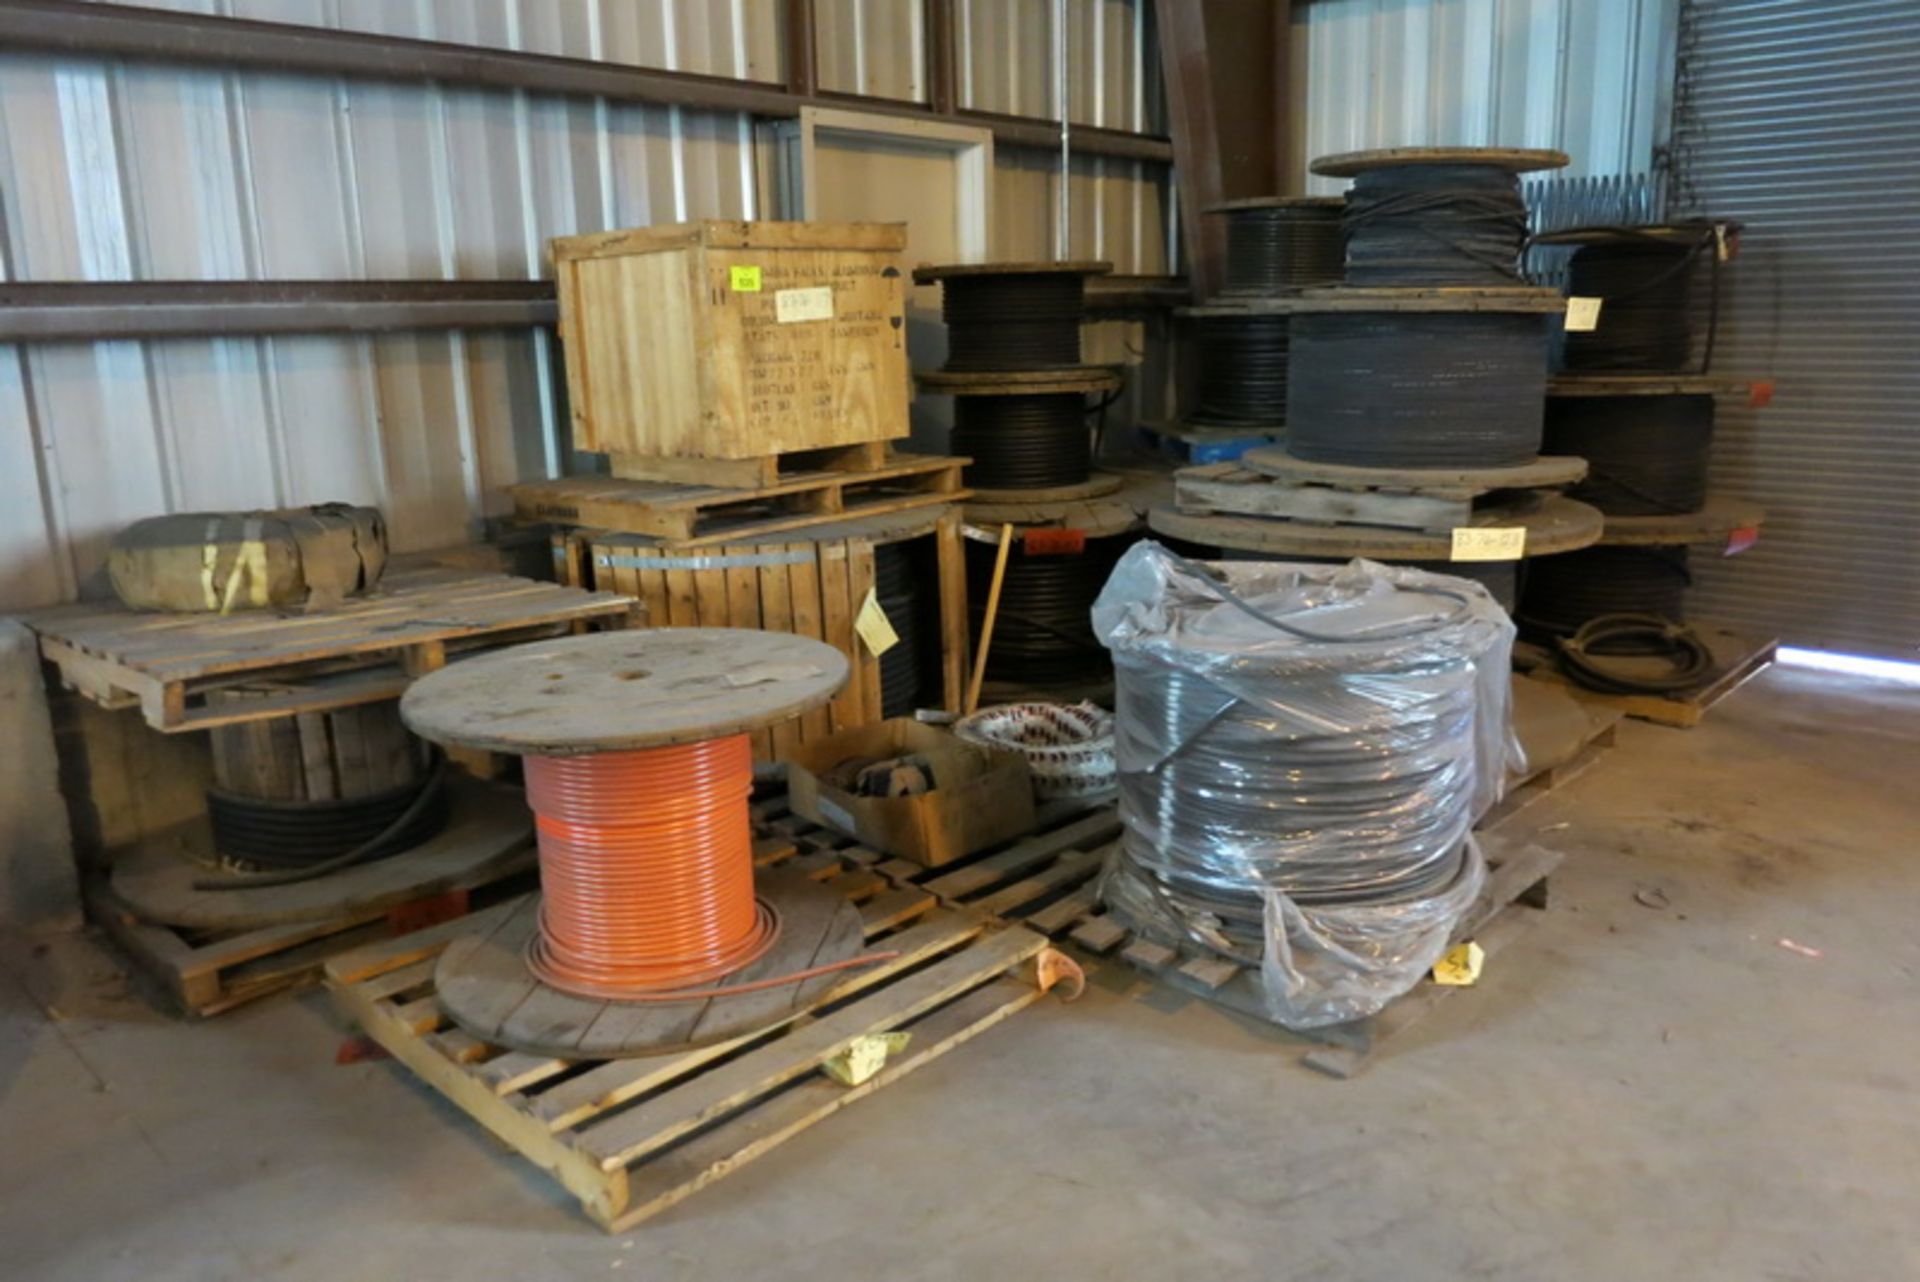 [Lot] (18) Spools of electrical wire and cables, 13 pallets